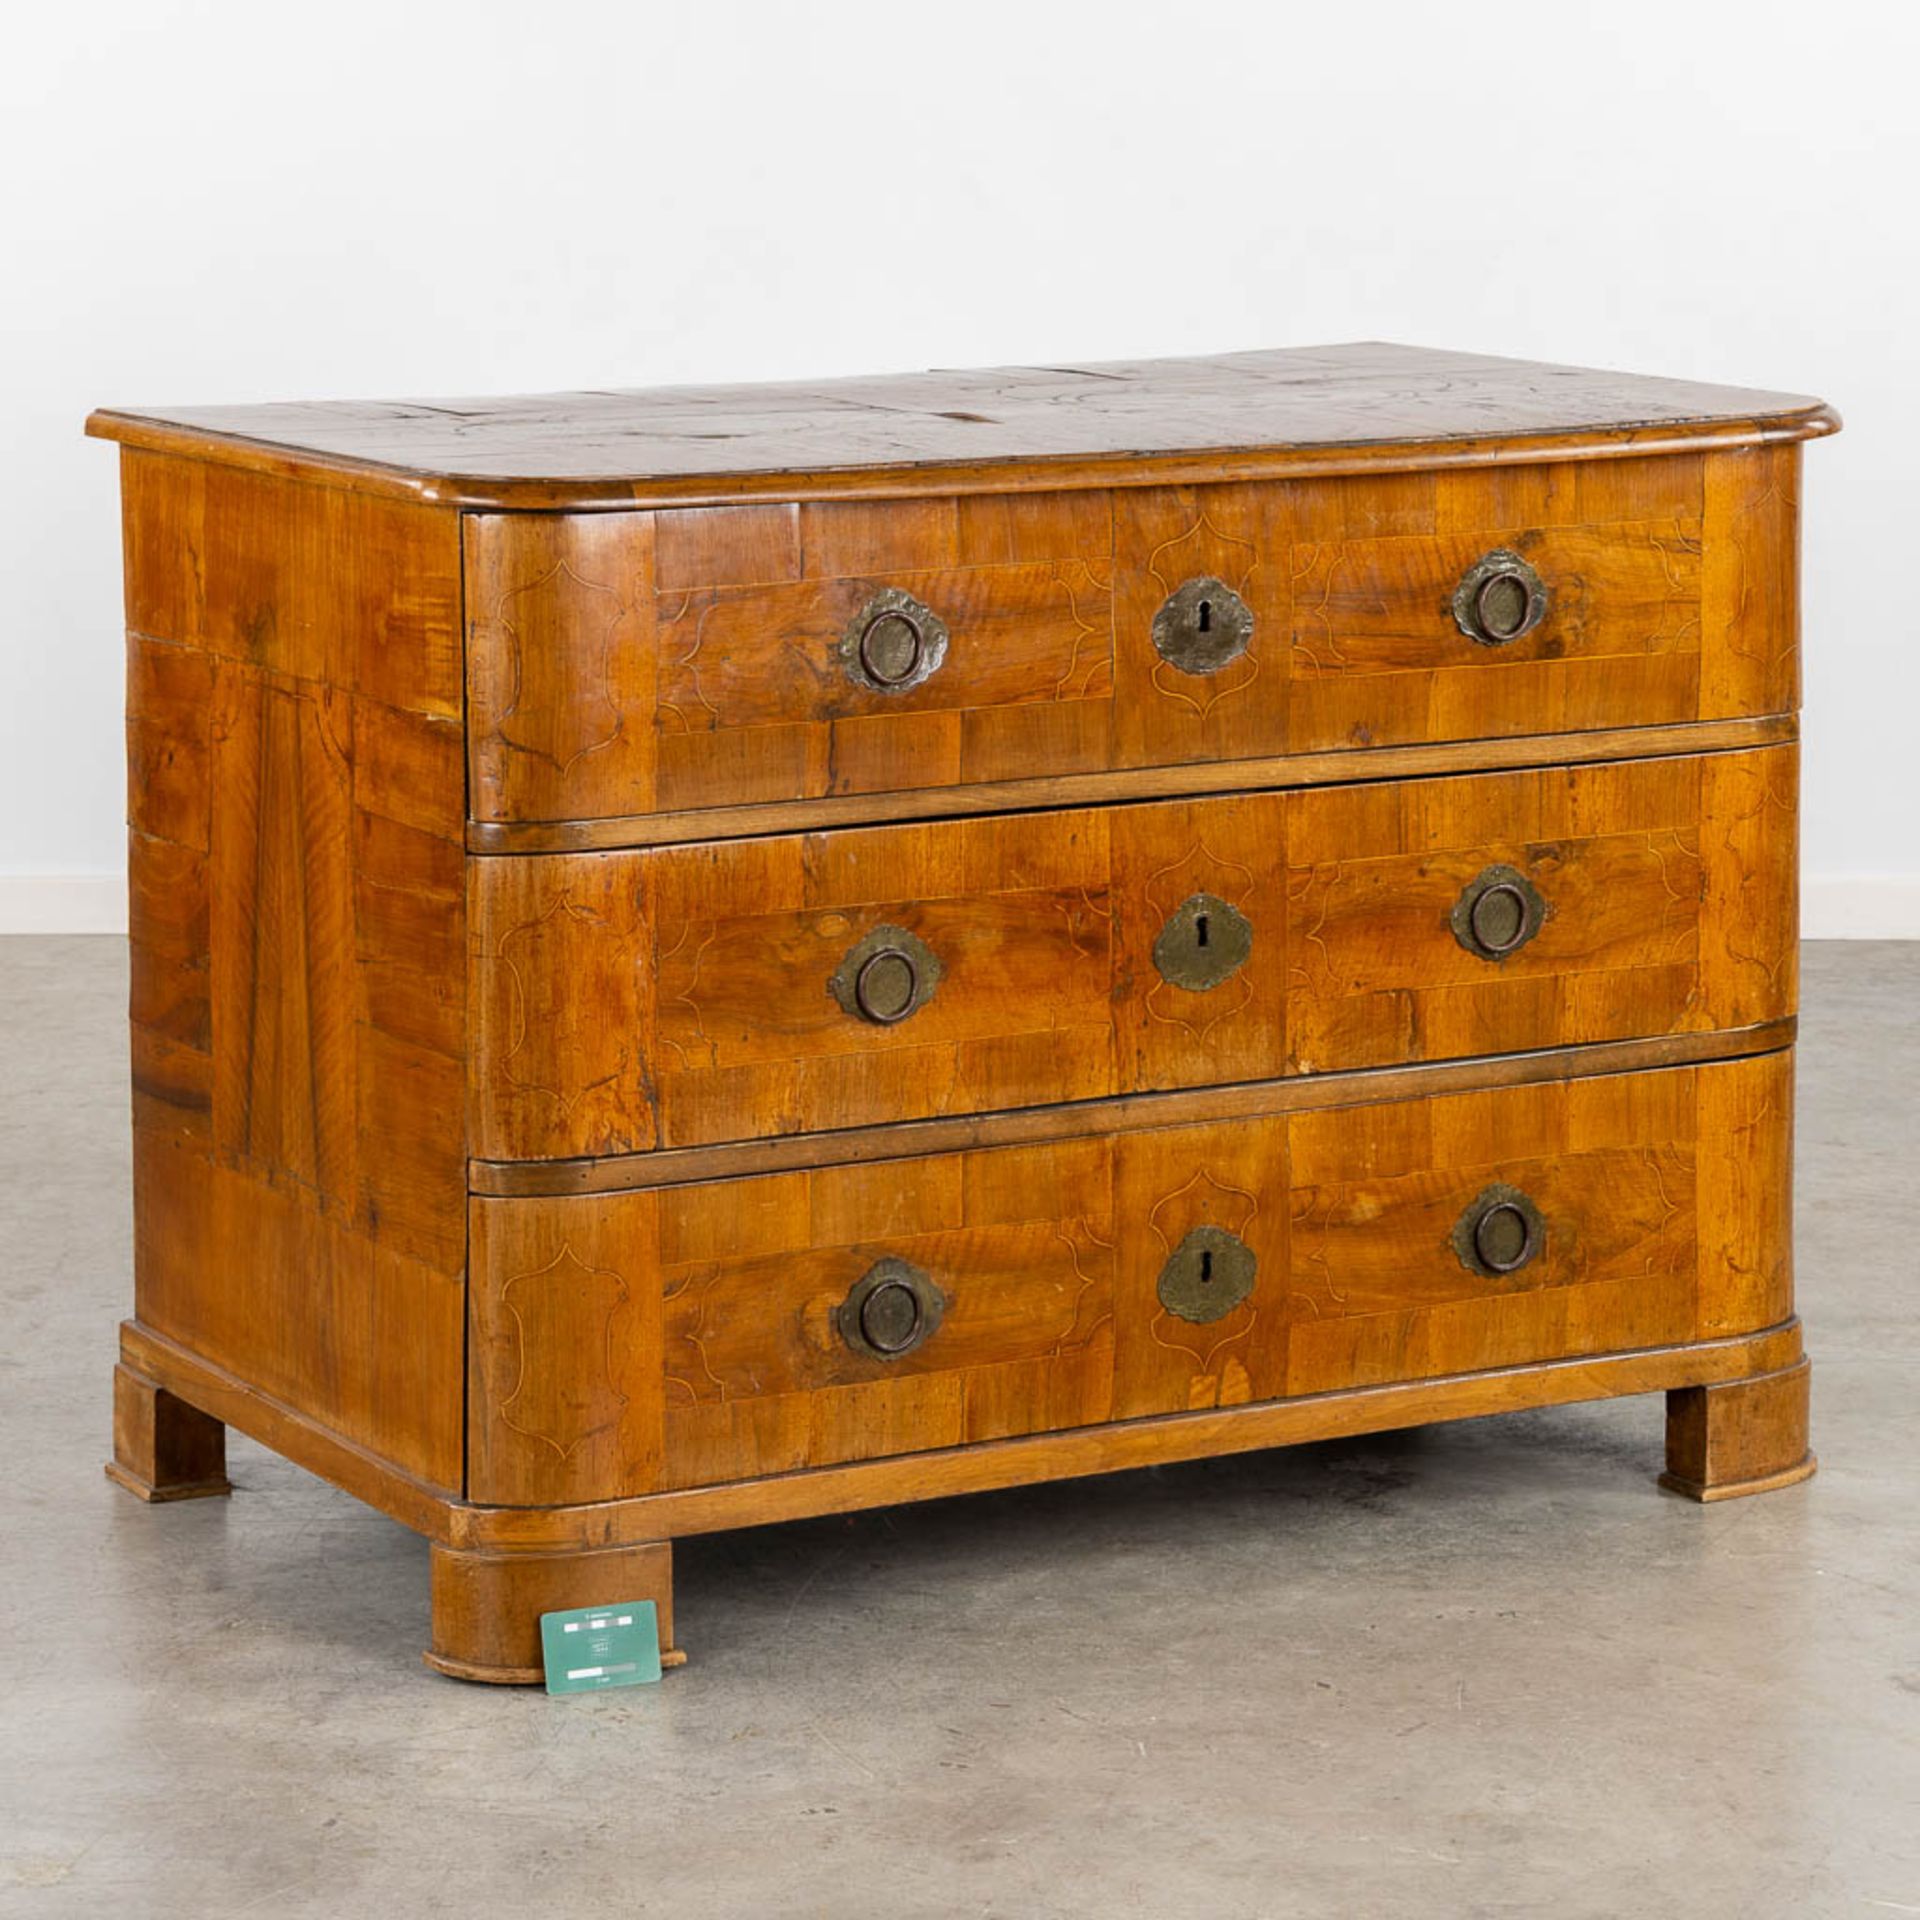 A large. commode with three drawers, Germany, 18th C. (L:68 x W:121 x H:84 cm) - Bild 2 aus 15